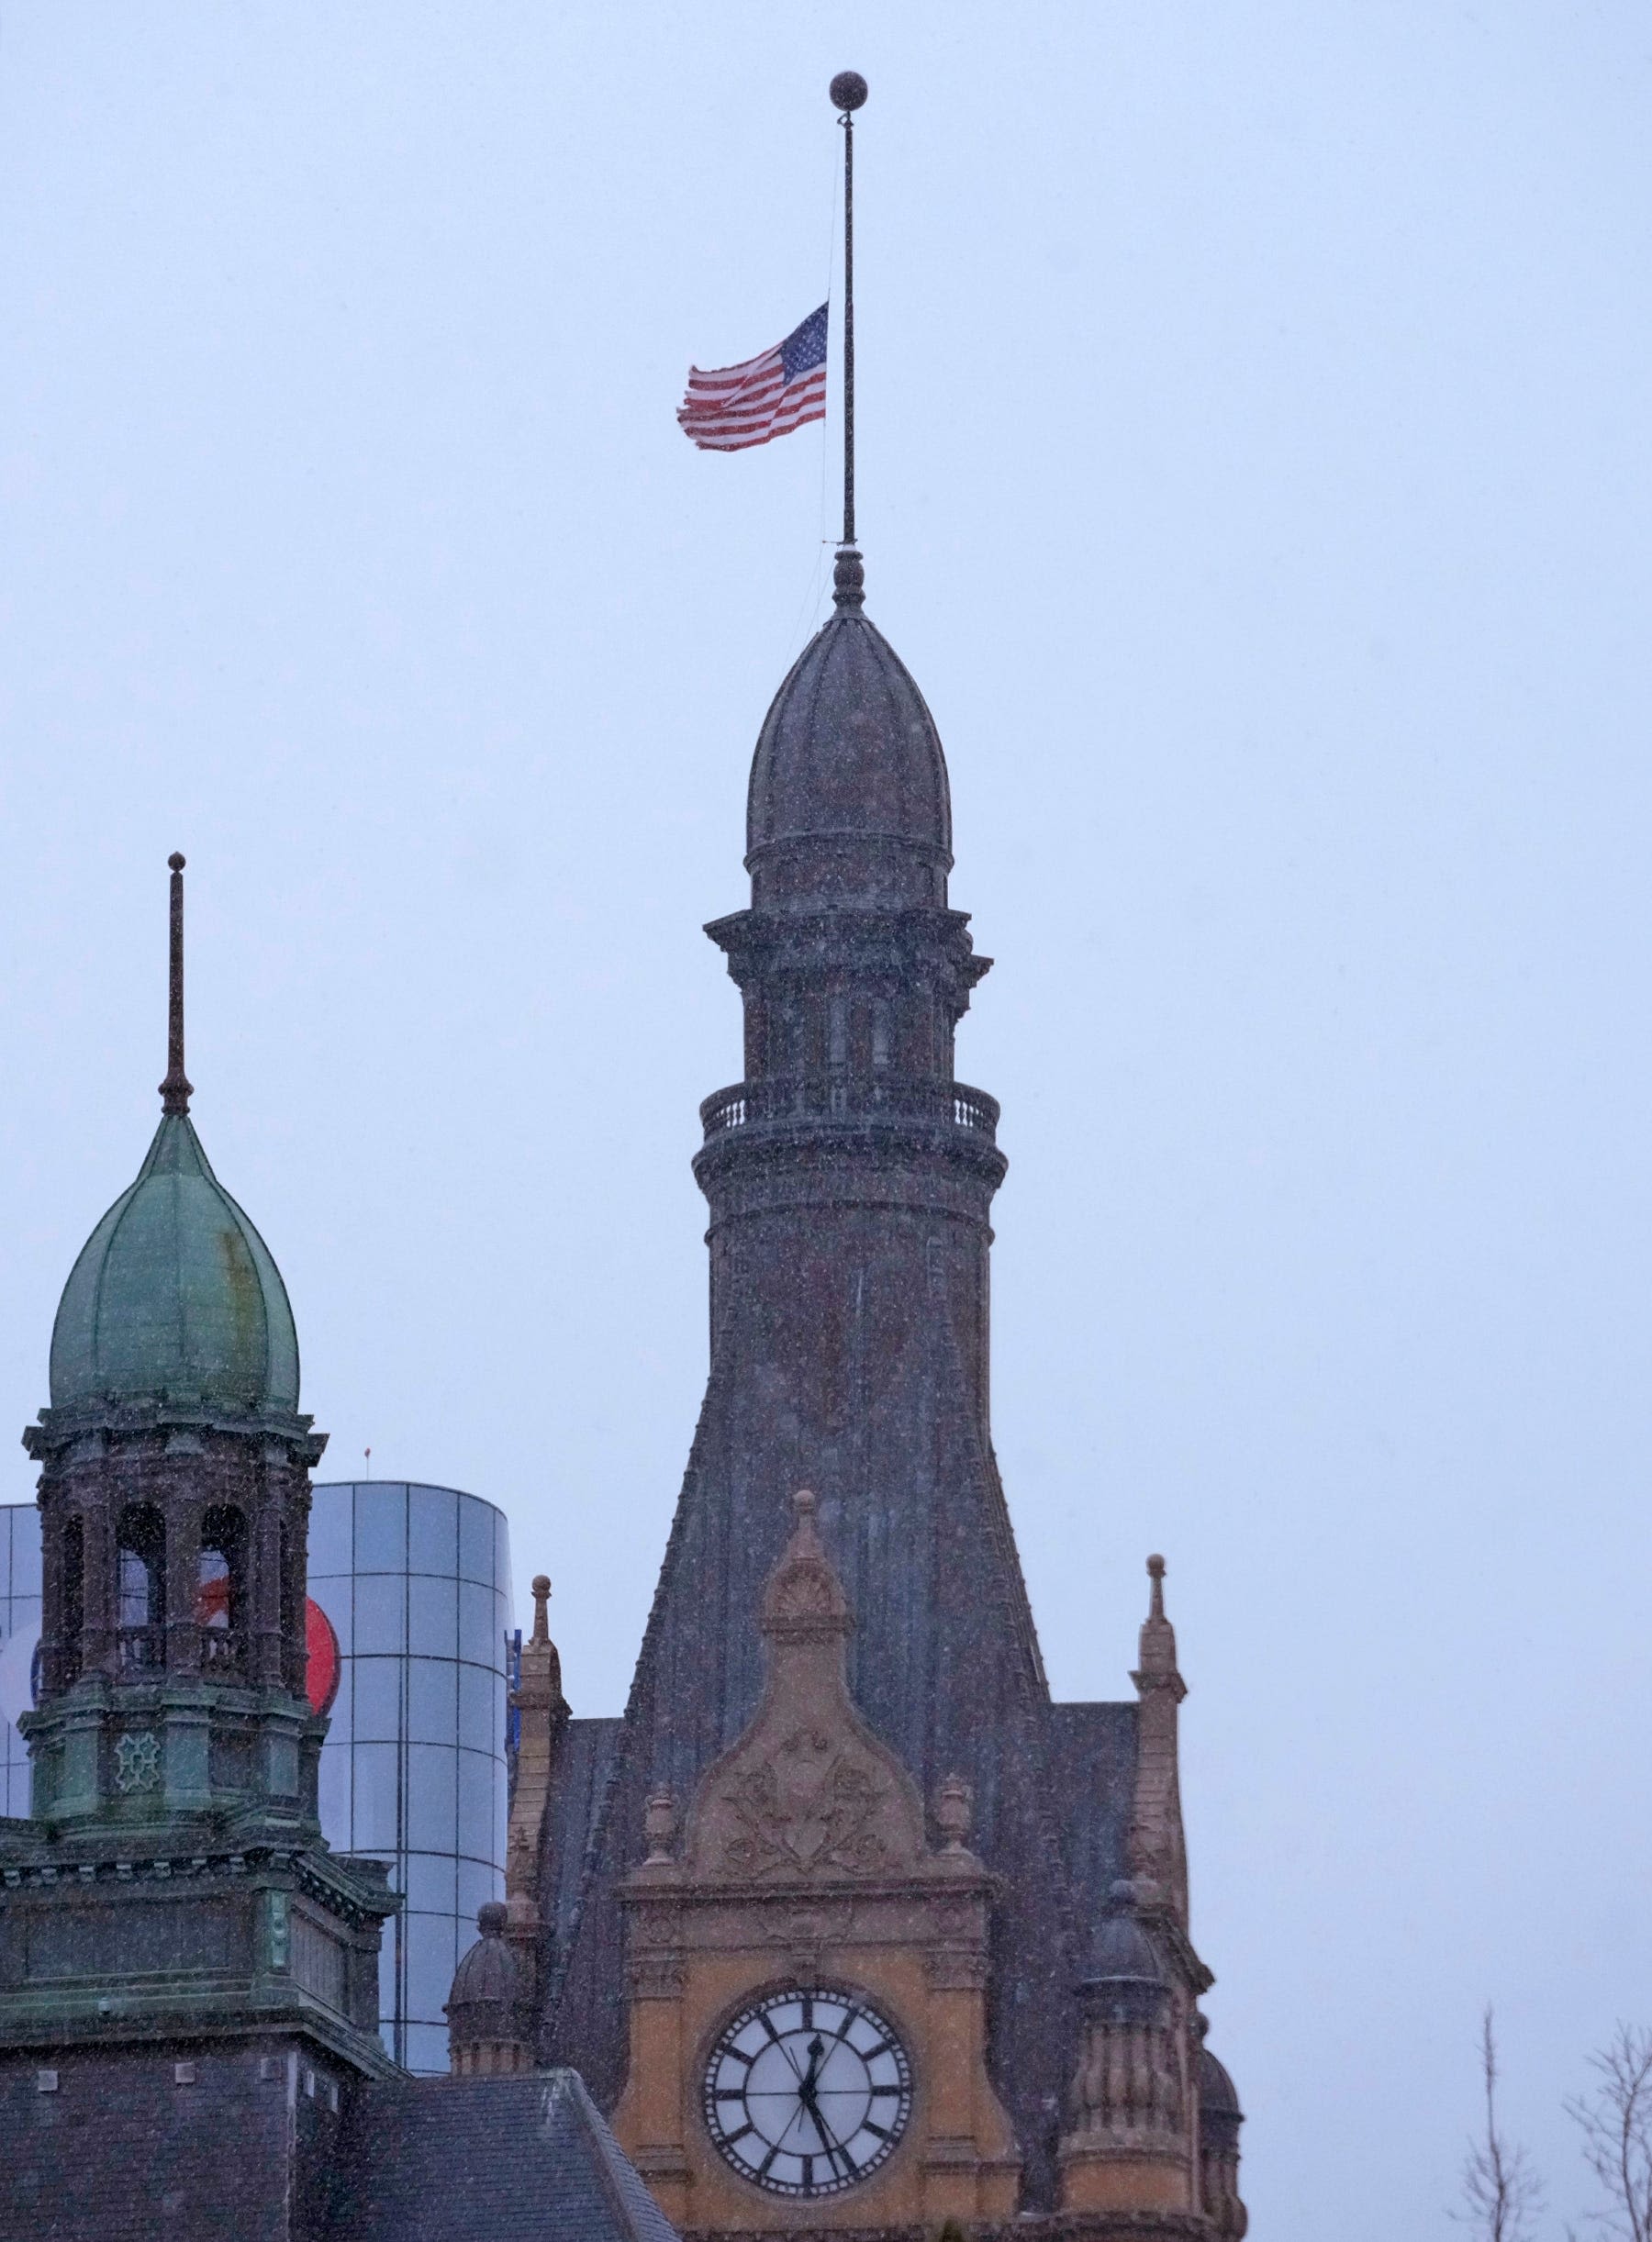 Why are the flags flying at half-staff in Wisconsin on Sunday?